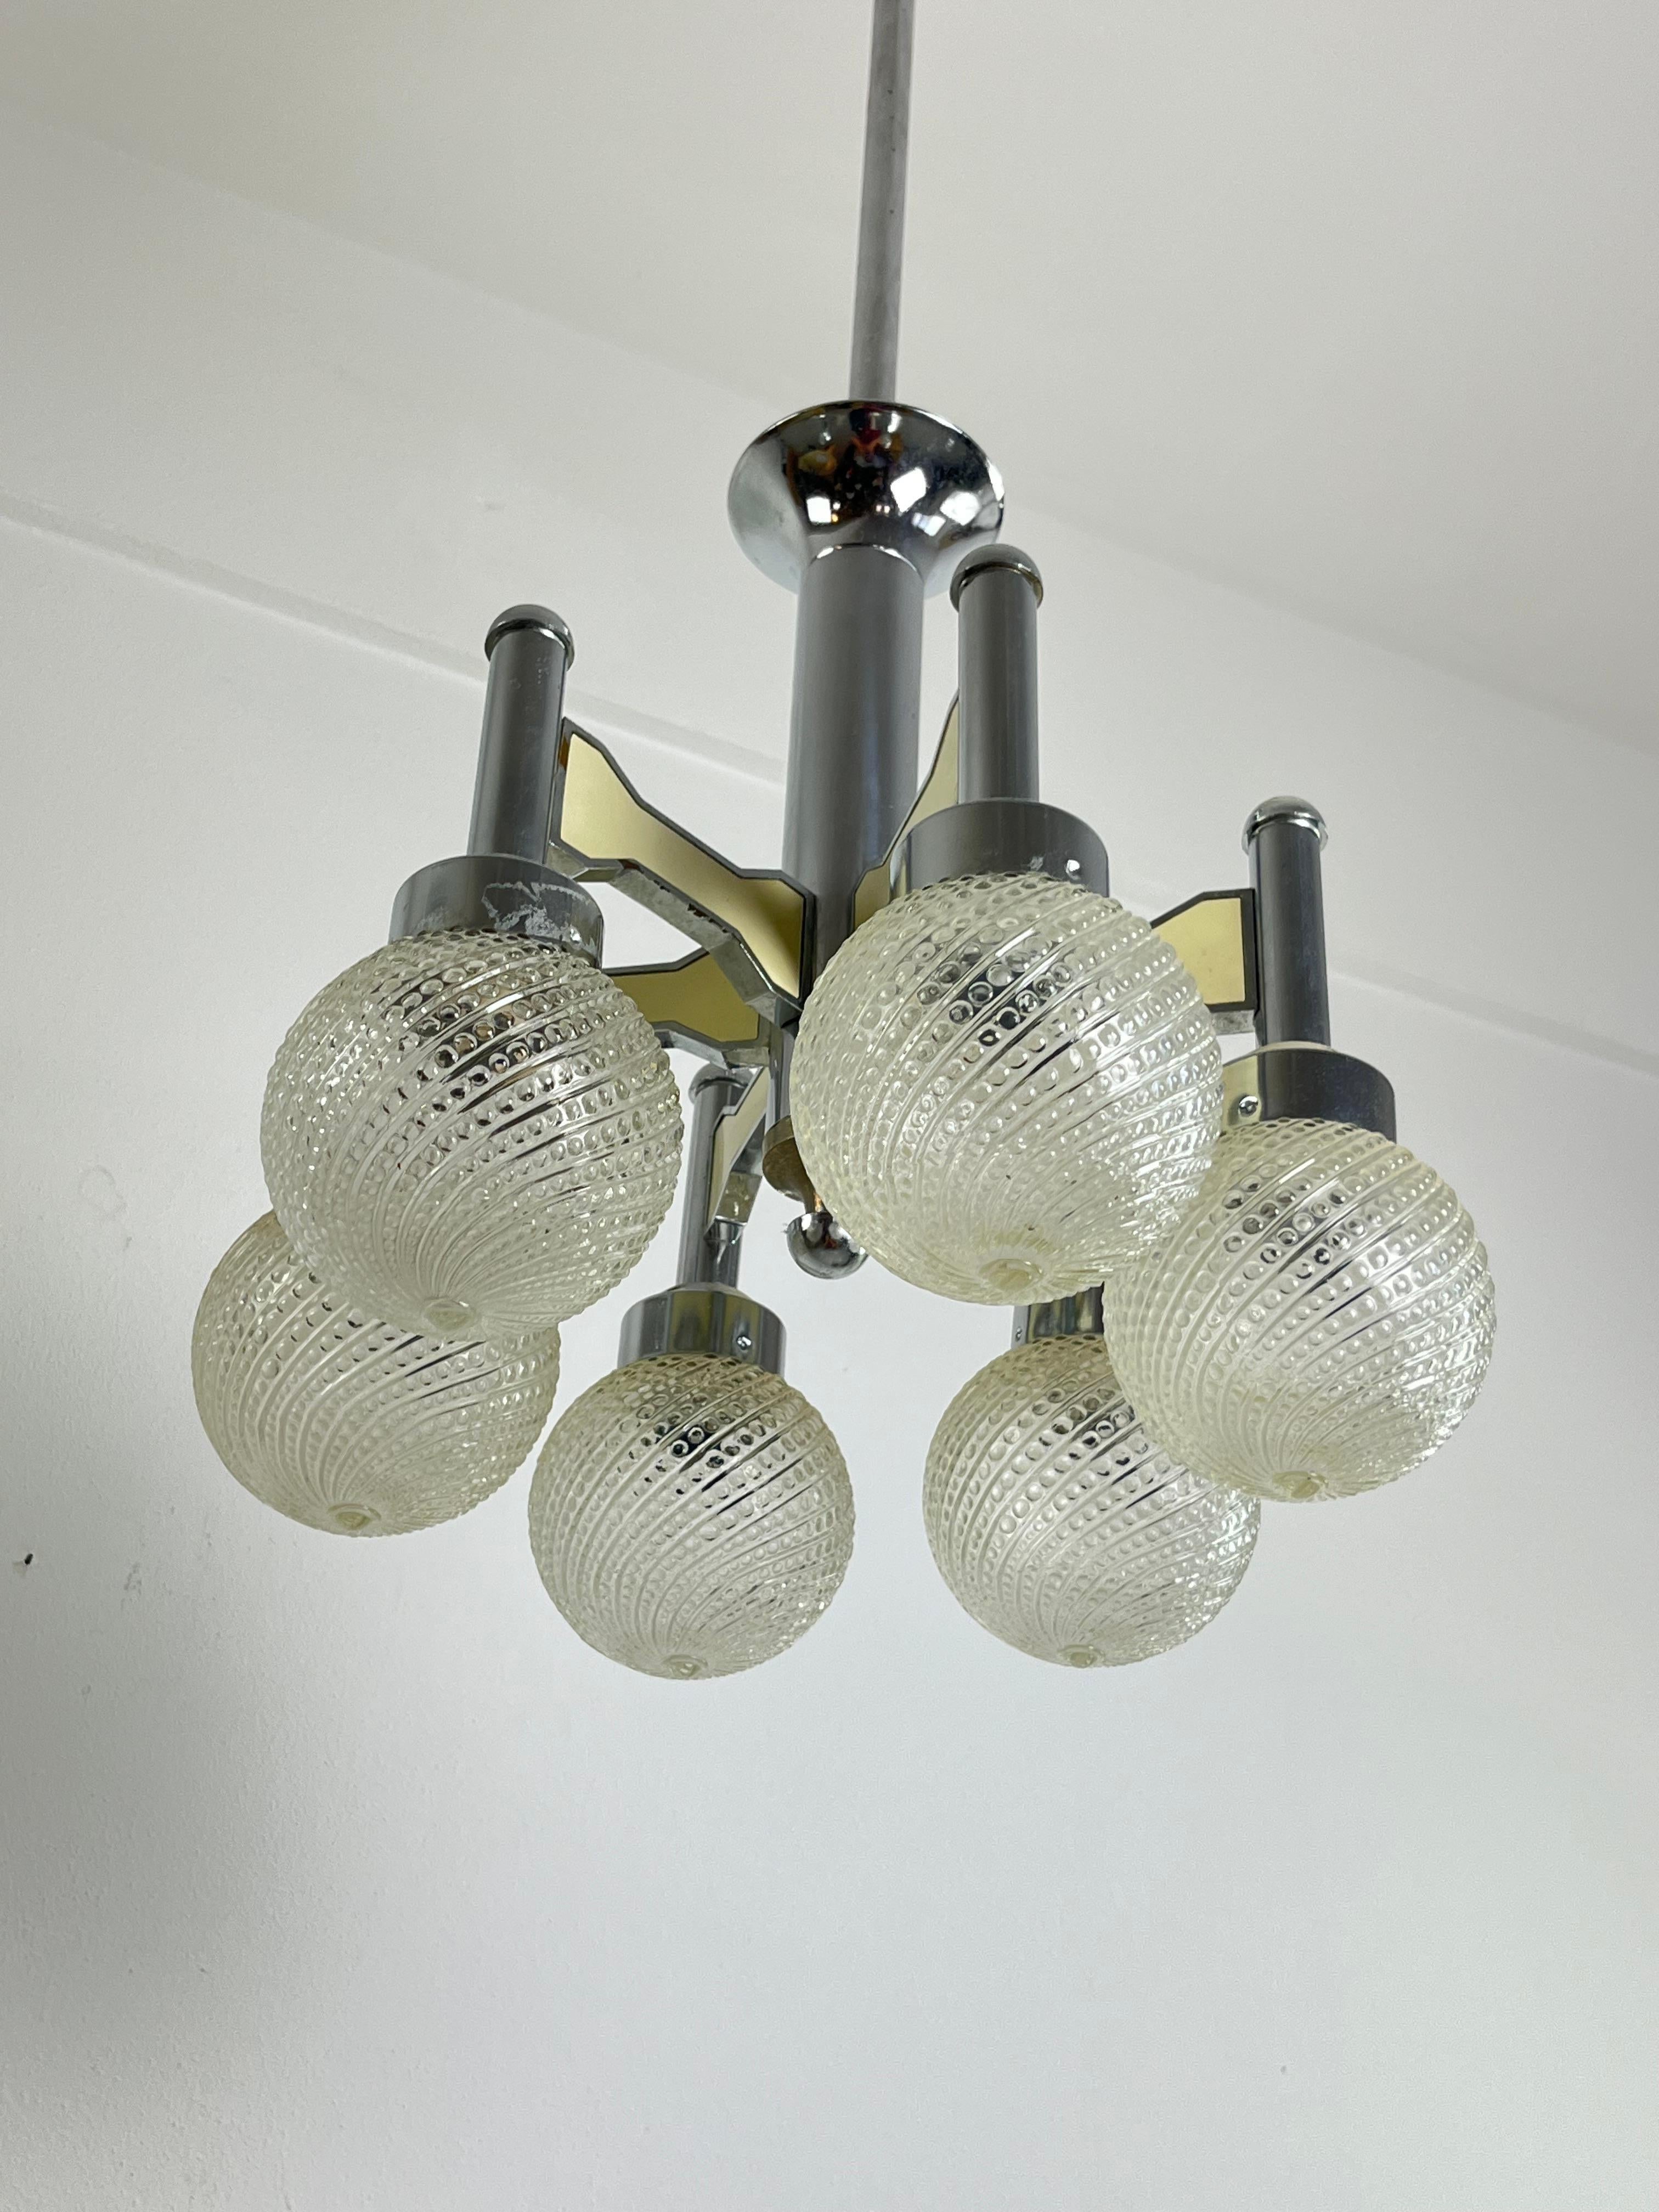 Vintage six-light steel and Murano glass chandelier attributed to Luciano Frigerio, 1970s.
Intact and functioning.
The steel structure is partially enamelled in beige.
E14 lamps.
Good condition, small signs of aging.